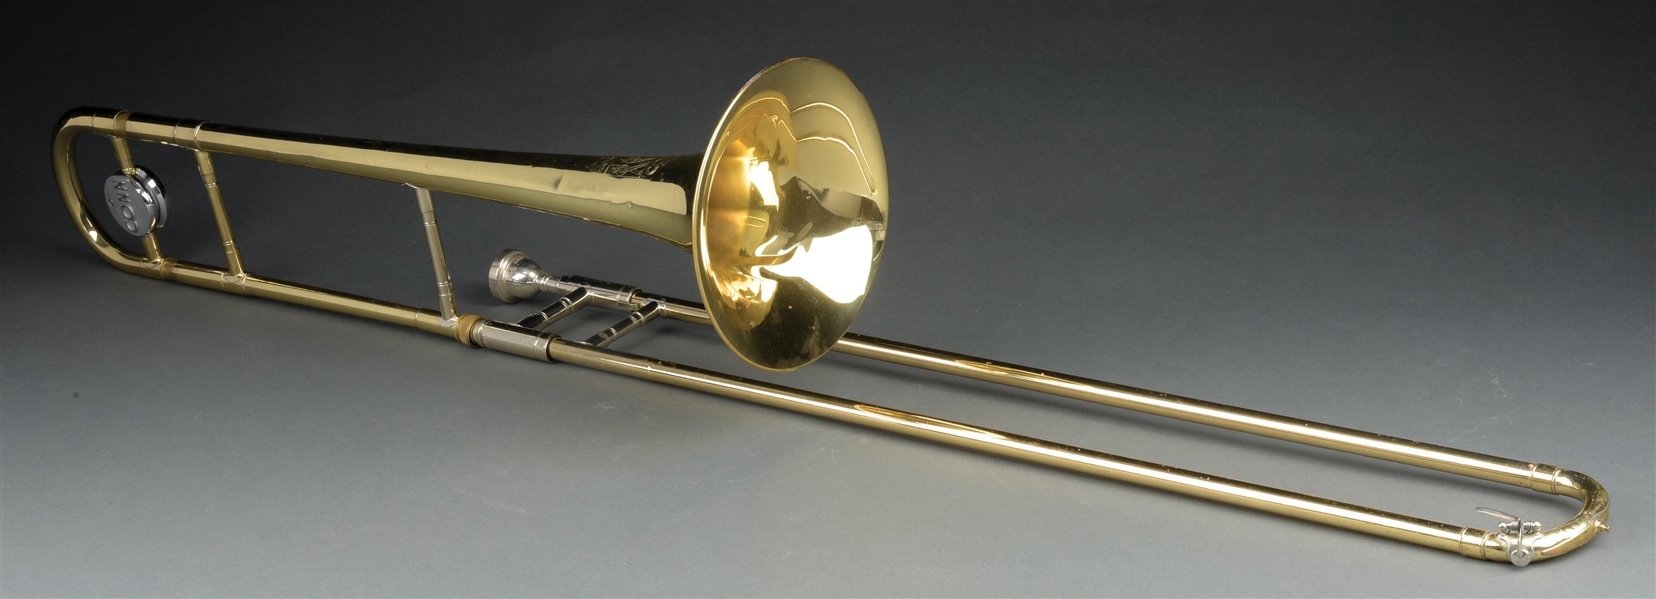 CONN DIRECTOR TROMBONE WITH CASE.